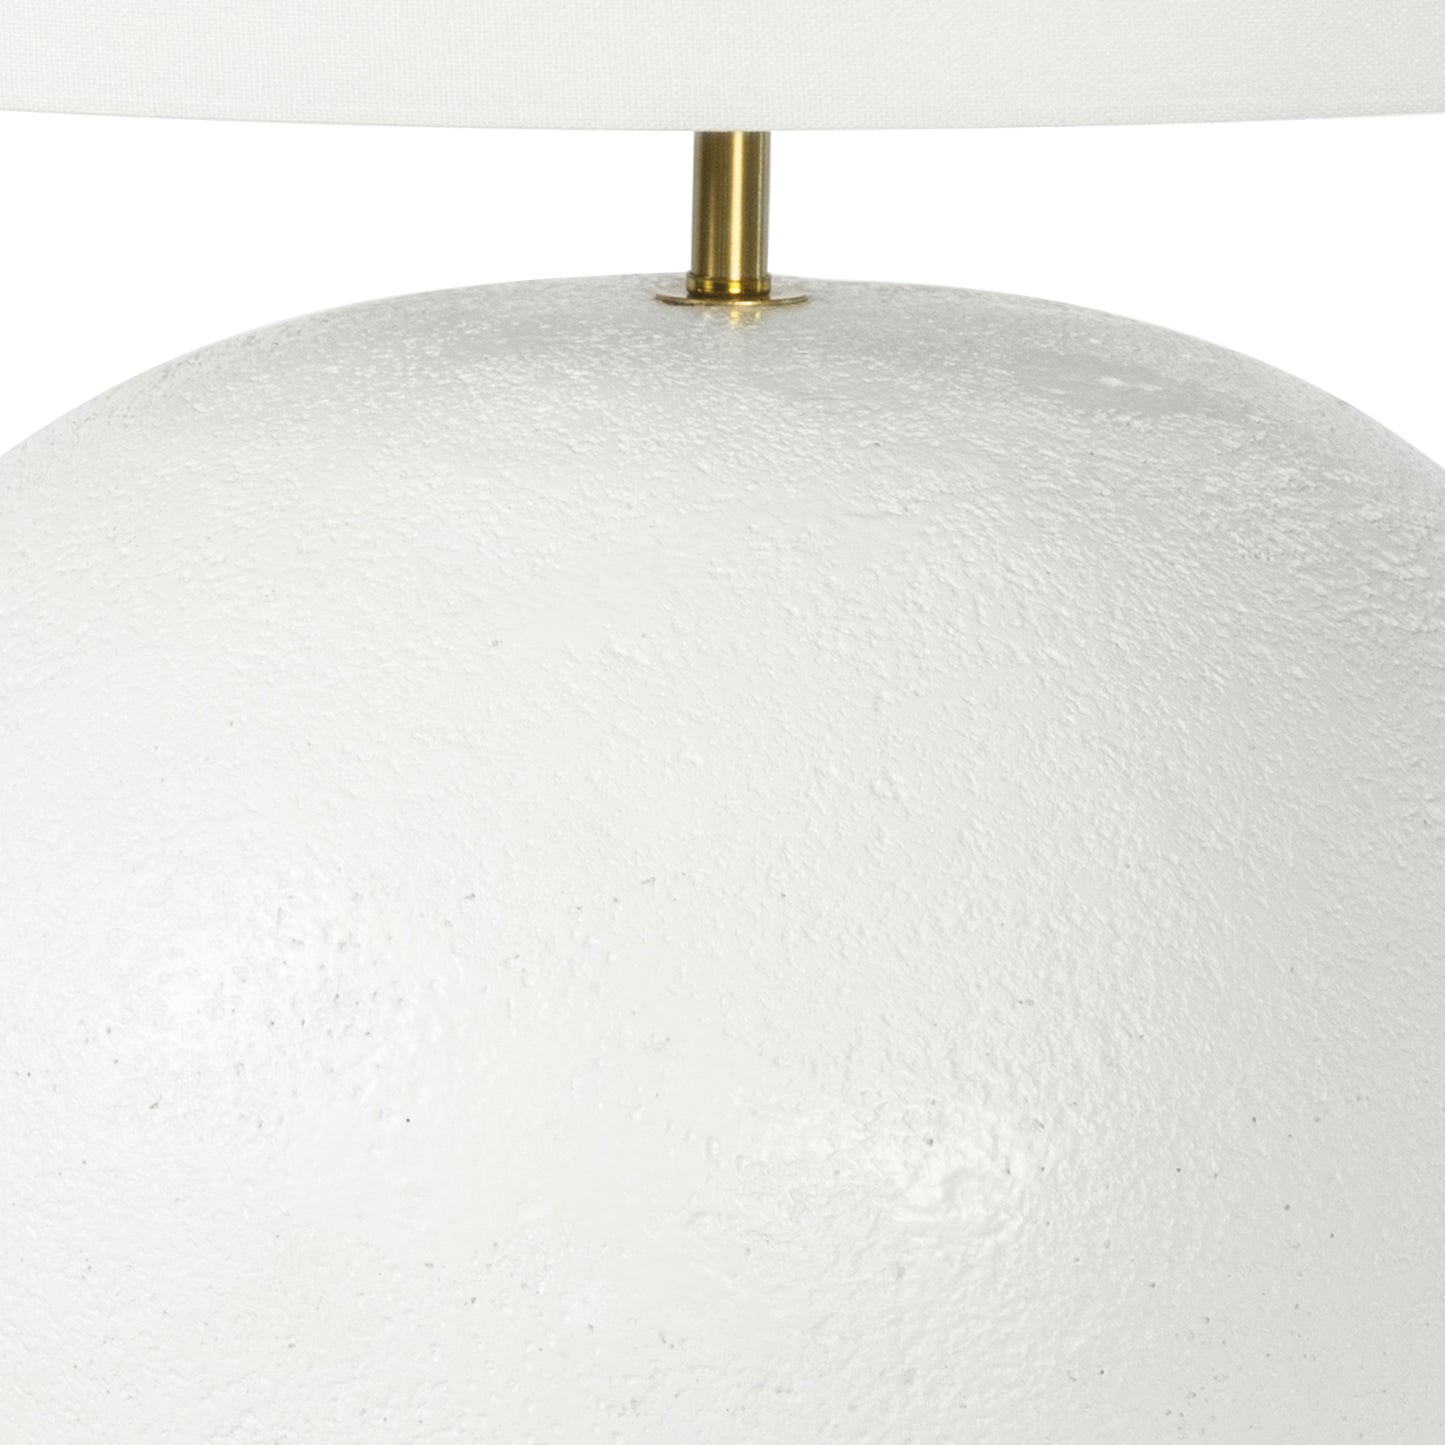 Blanche Concrete Table Lamp by Southern Living